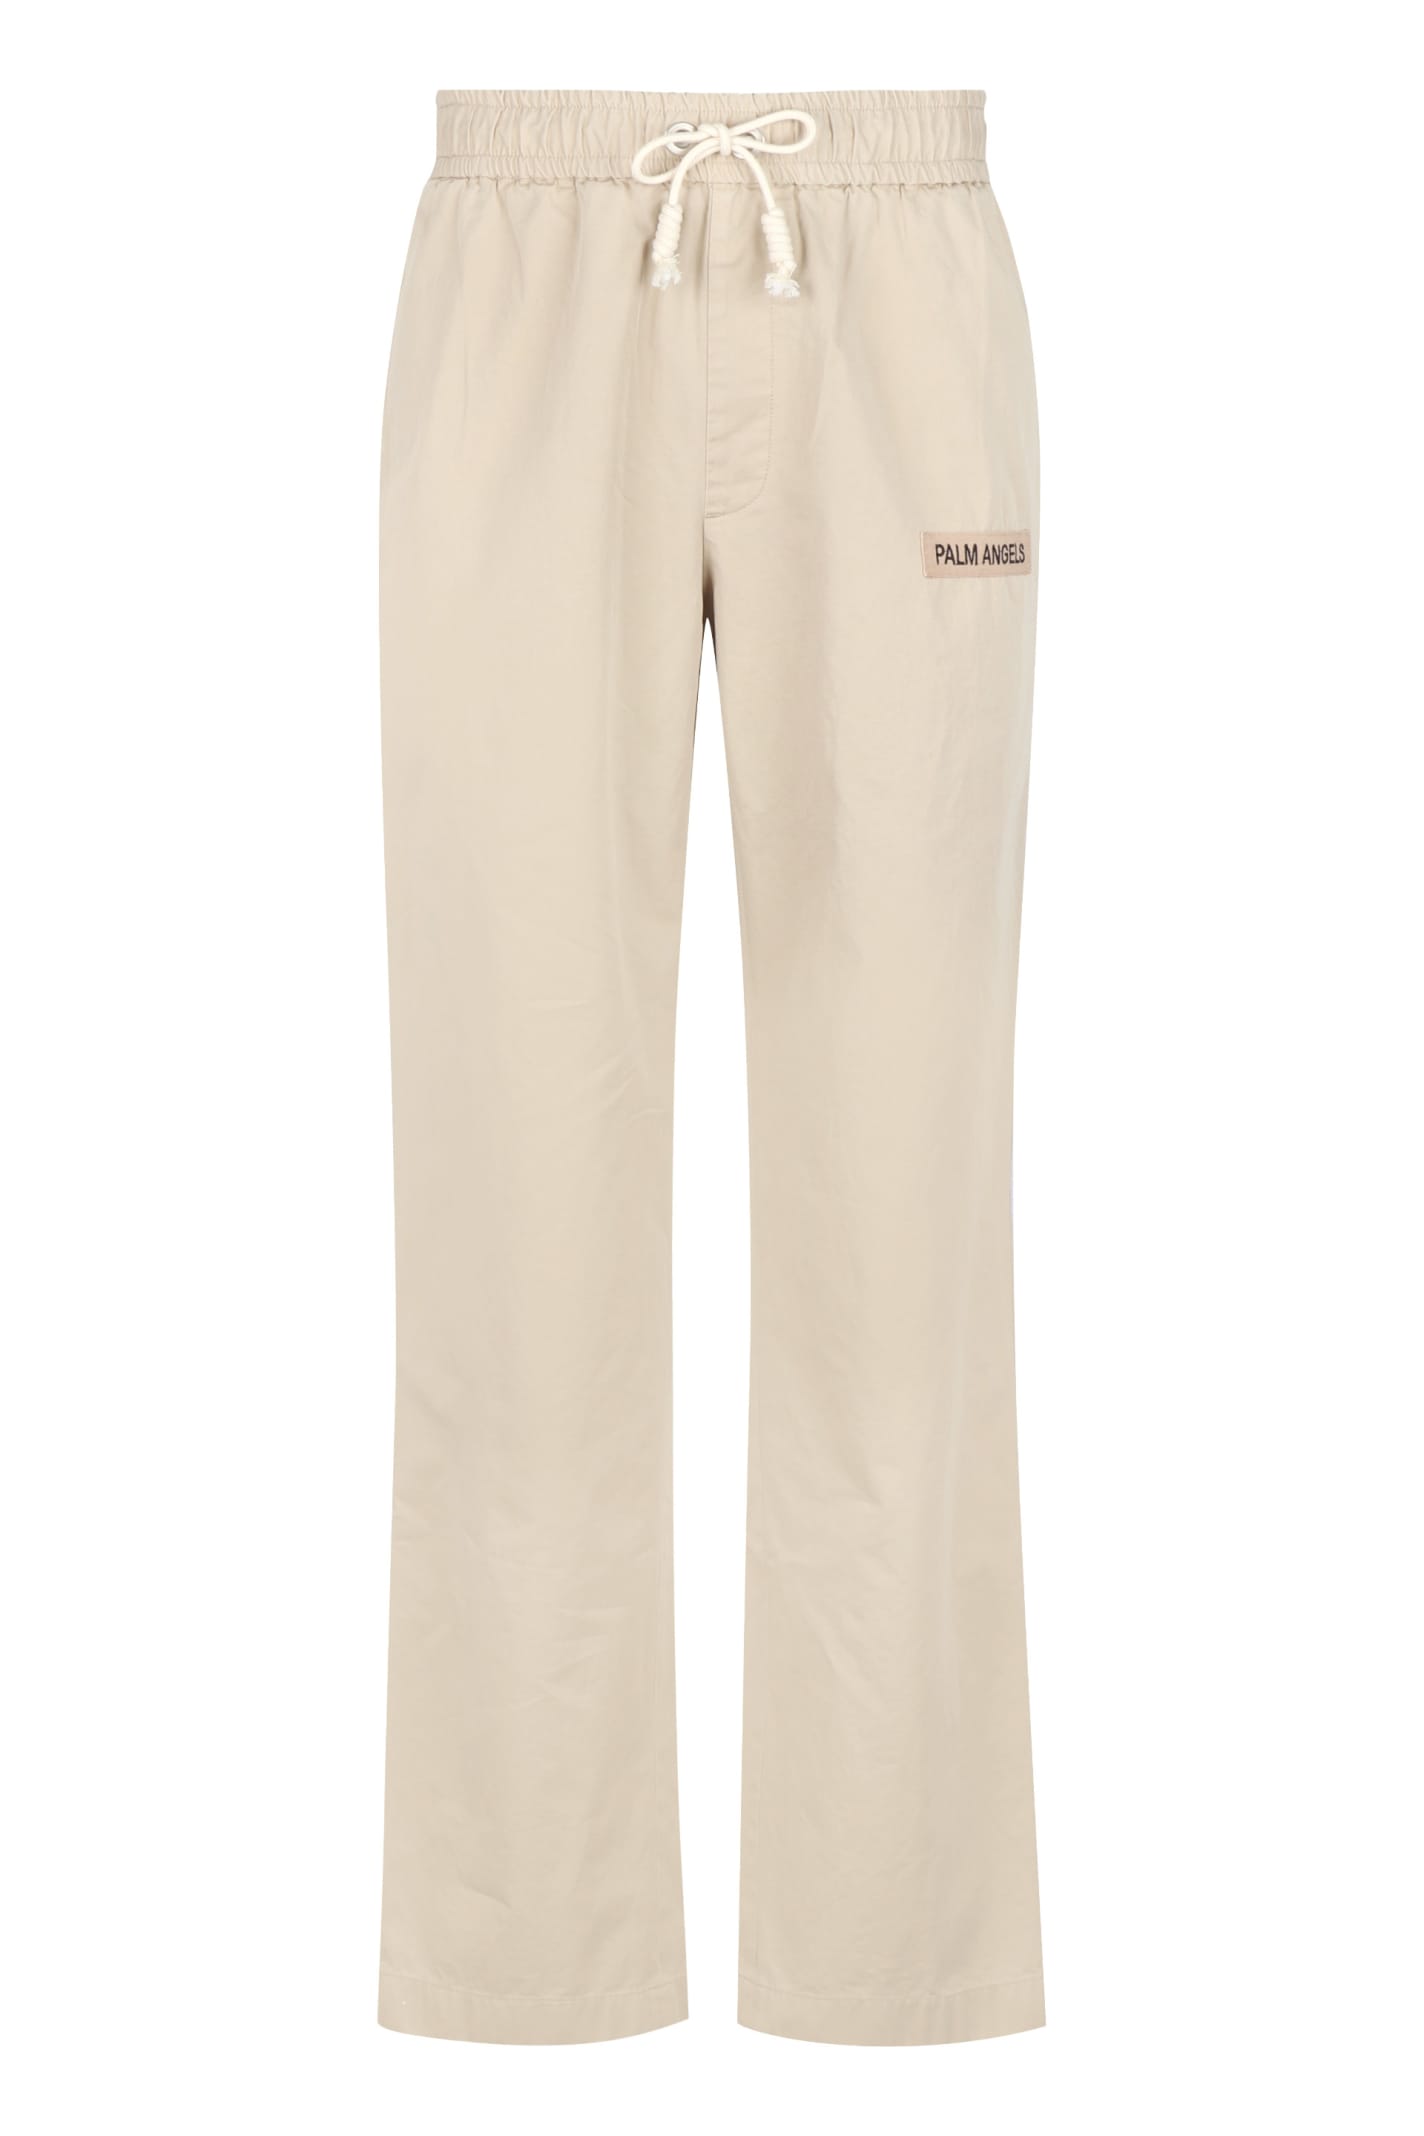 Palm Angels Contrasting Side Stripes Trousers